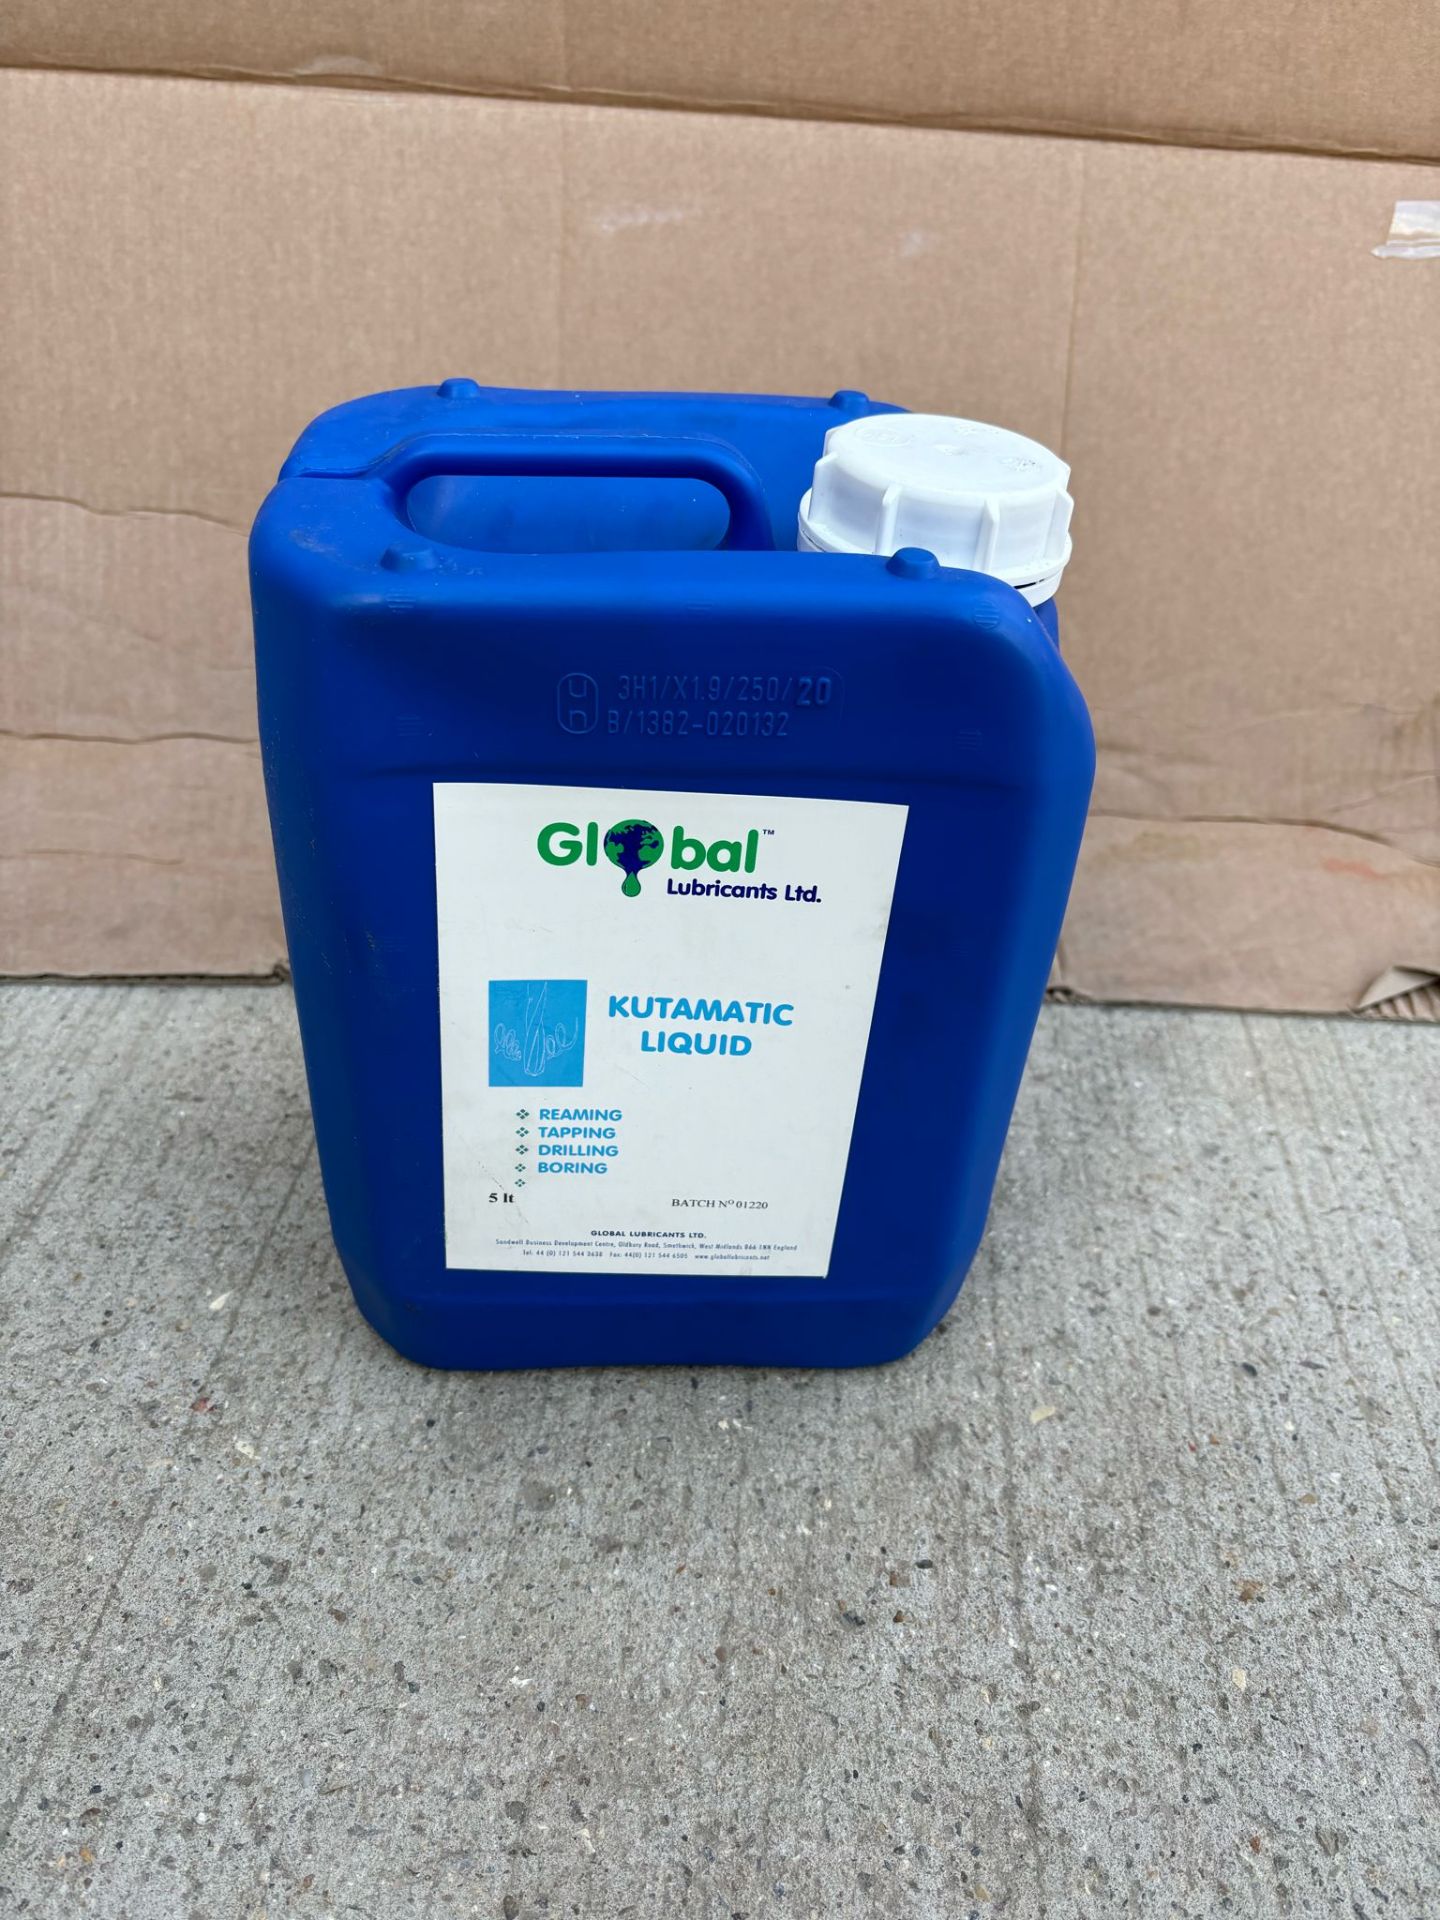 GLOBAL LUBRICANTS KUTAMATIC LIQUID FOR REAMING TAPPING DRILLING BORING - 5L SEALED